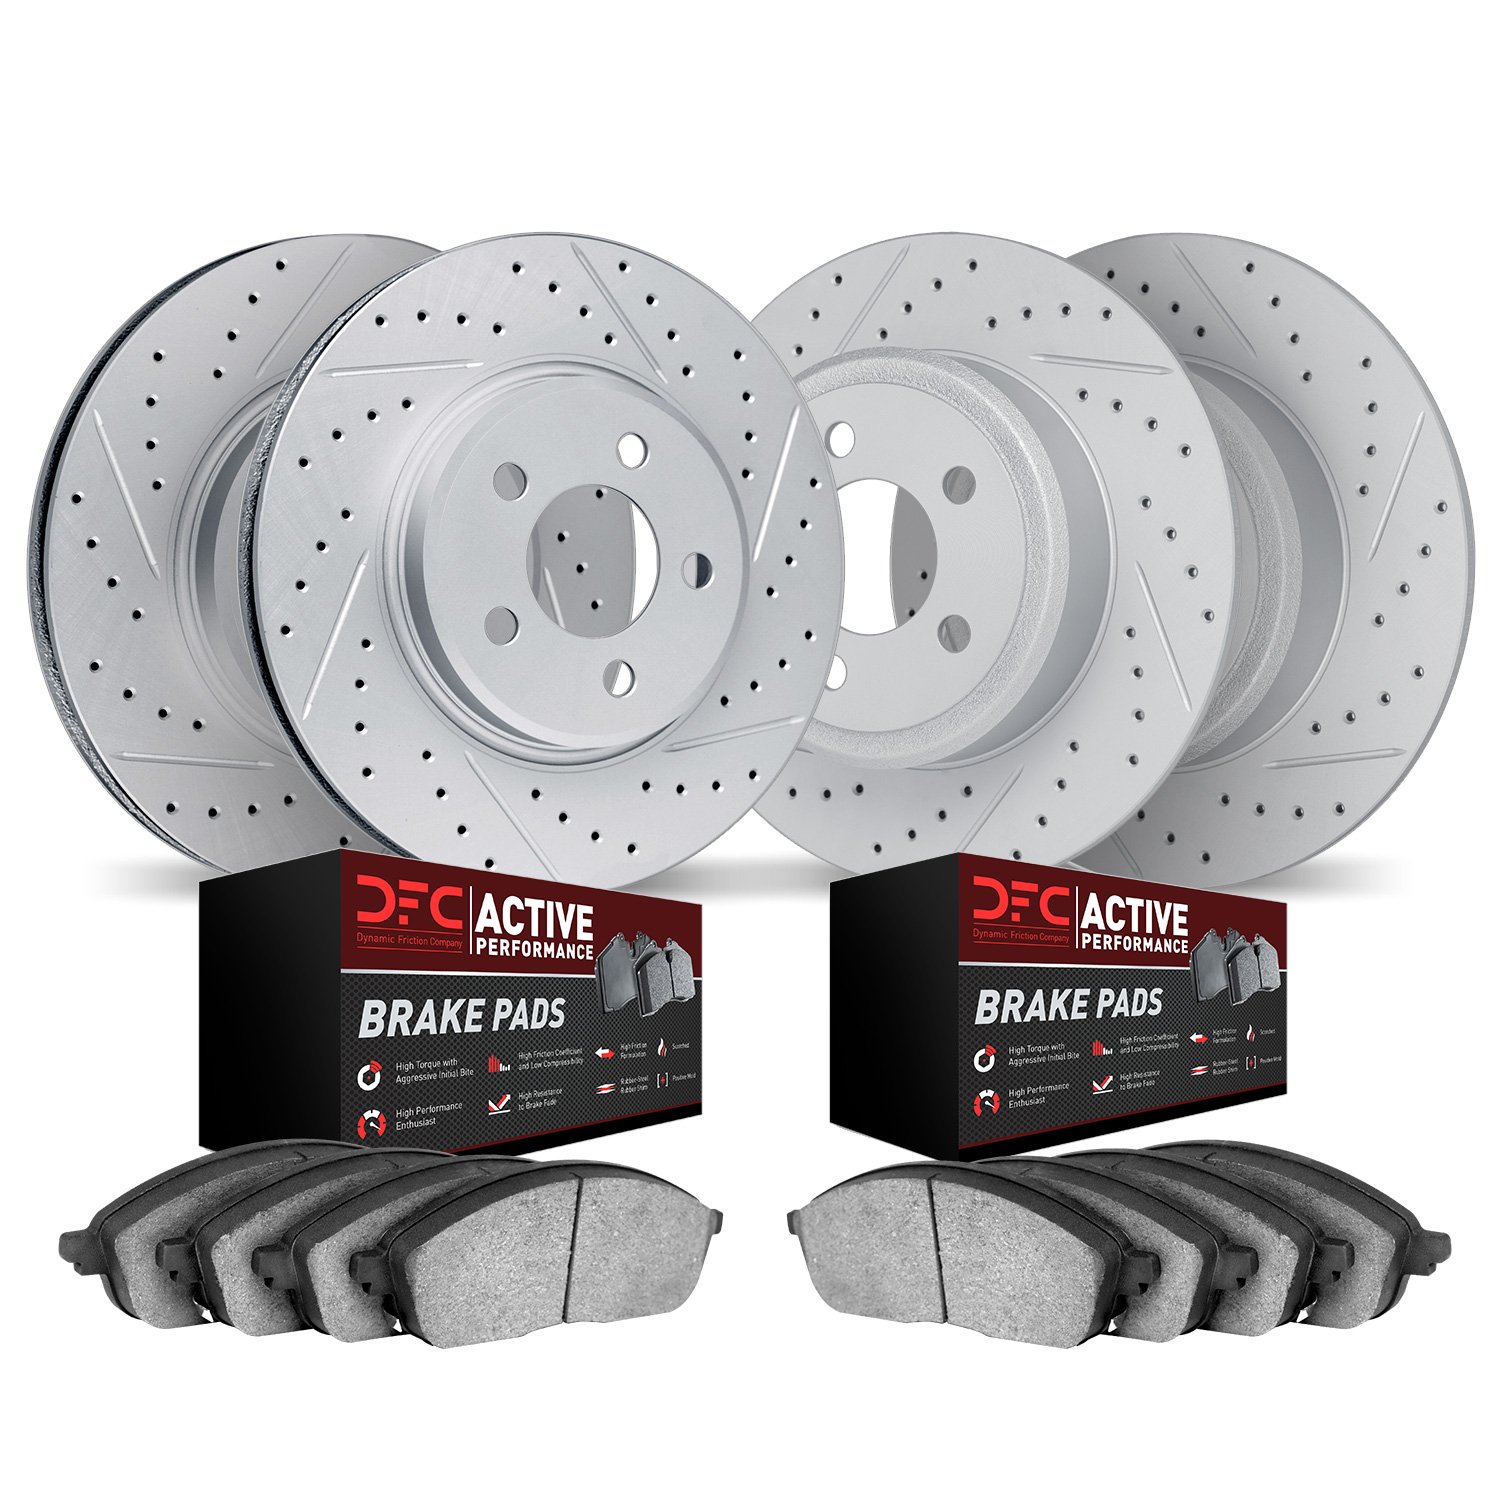 2704-73009 Geoperformance Drilled/Slotted Brake Rotors with Active Performance Pads Kit, 2005-2011 Audi/Volkswagen, Position: Fr